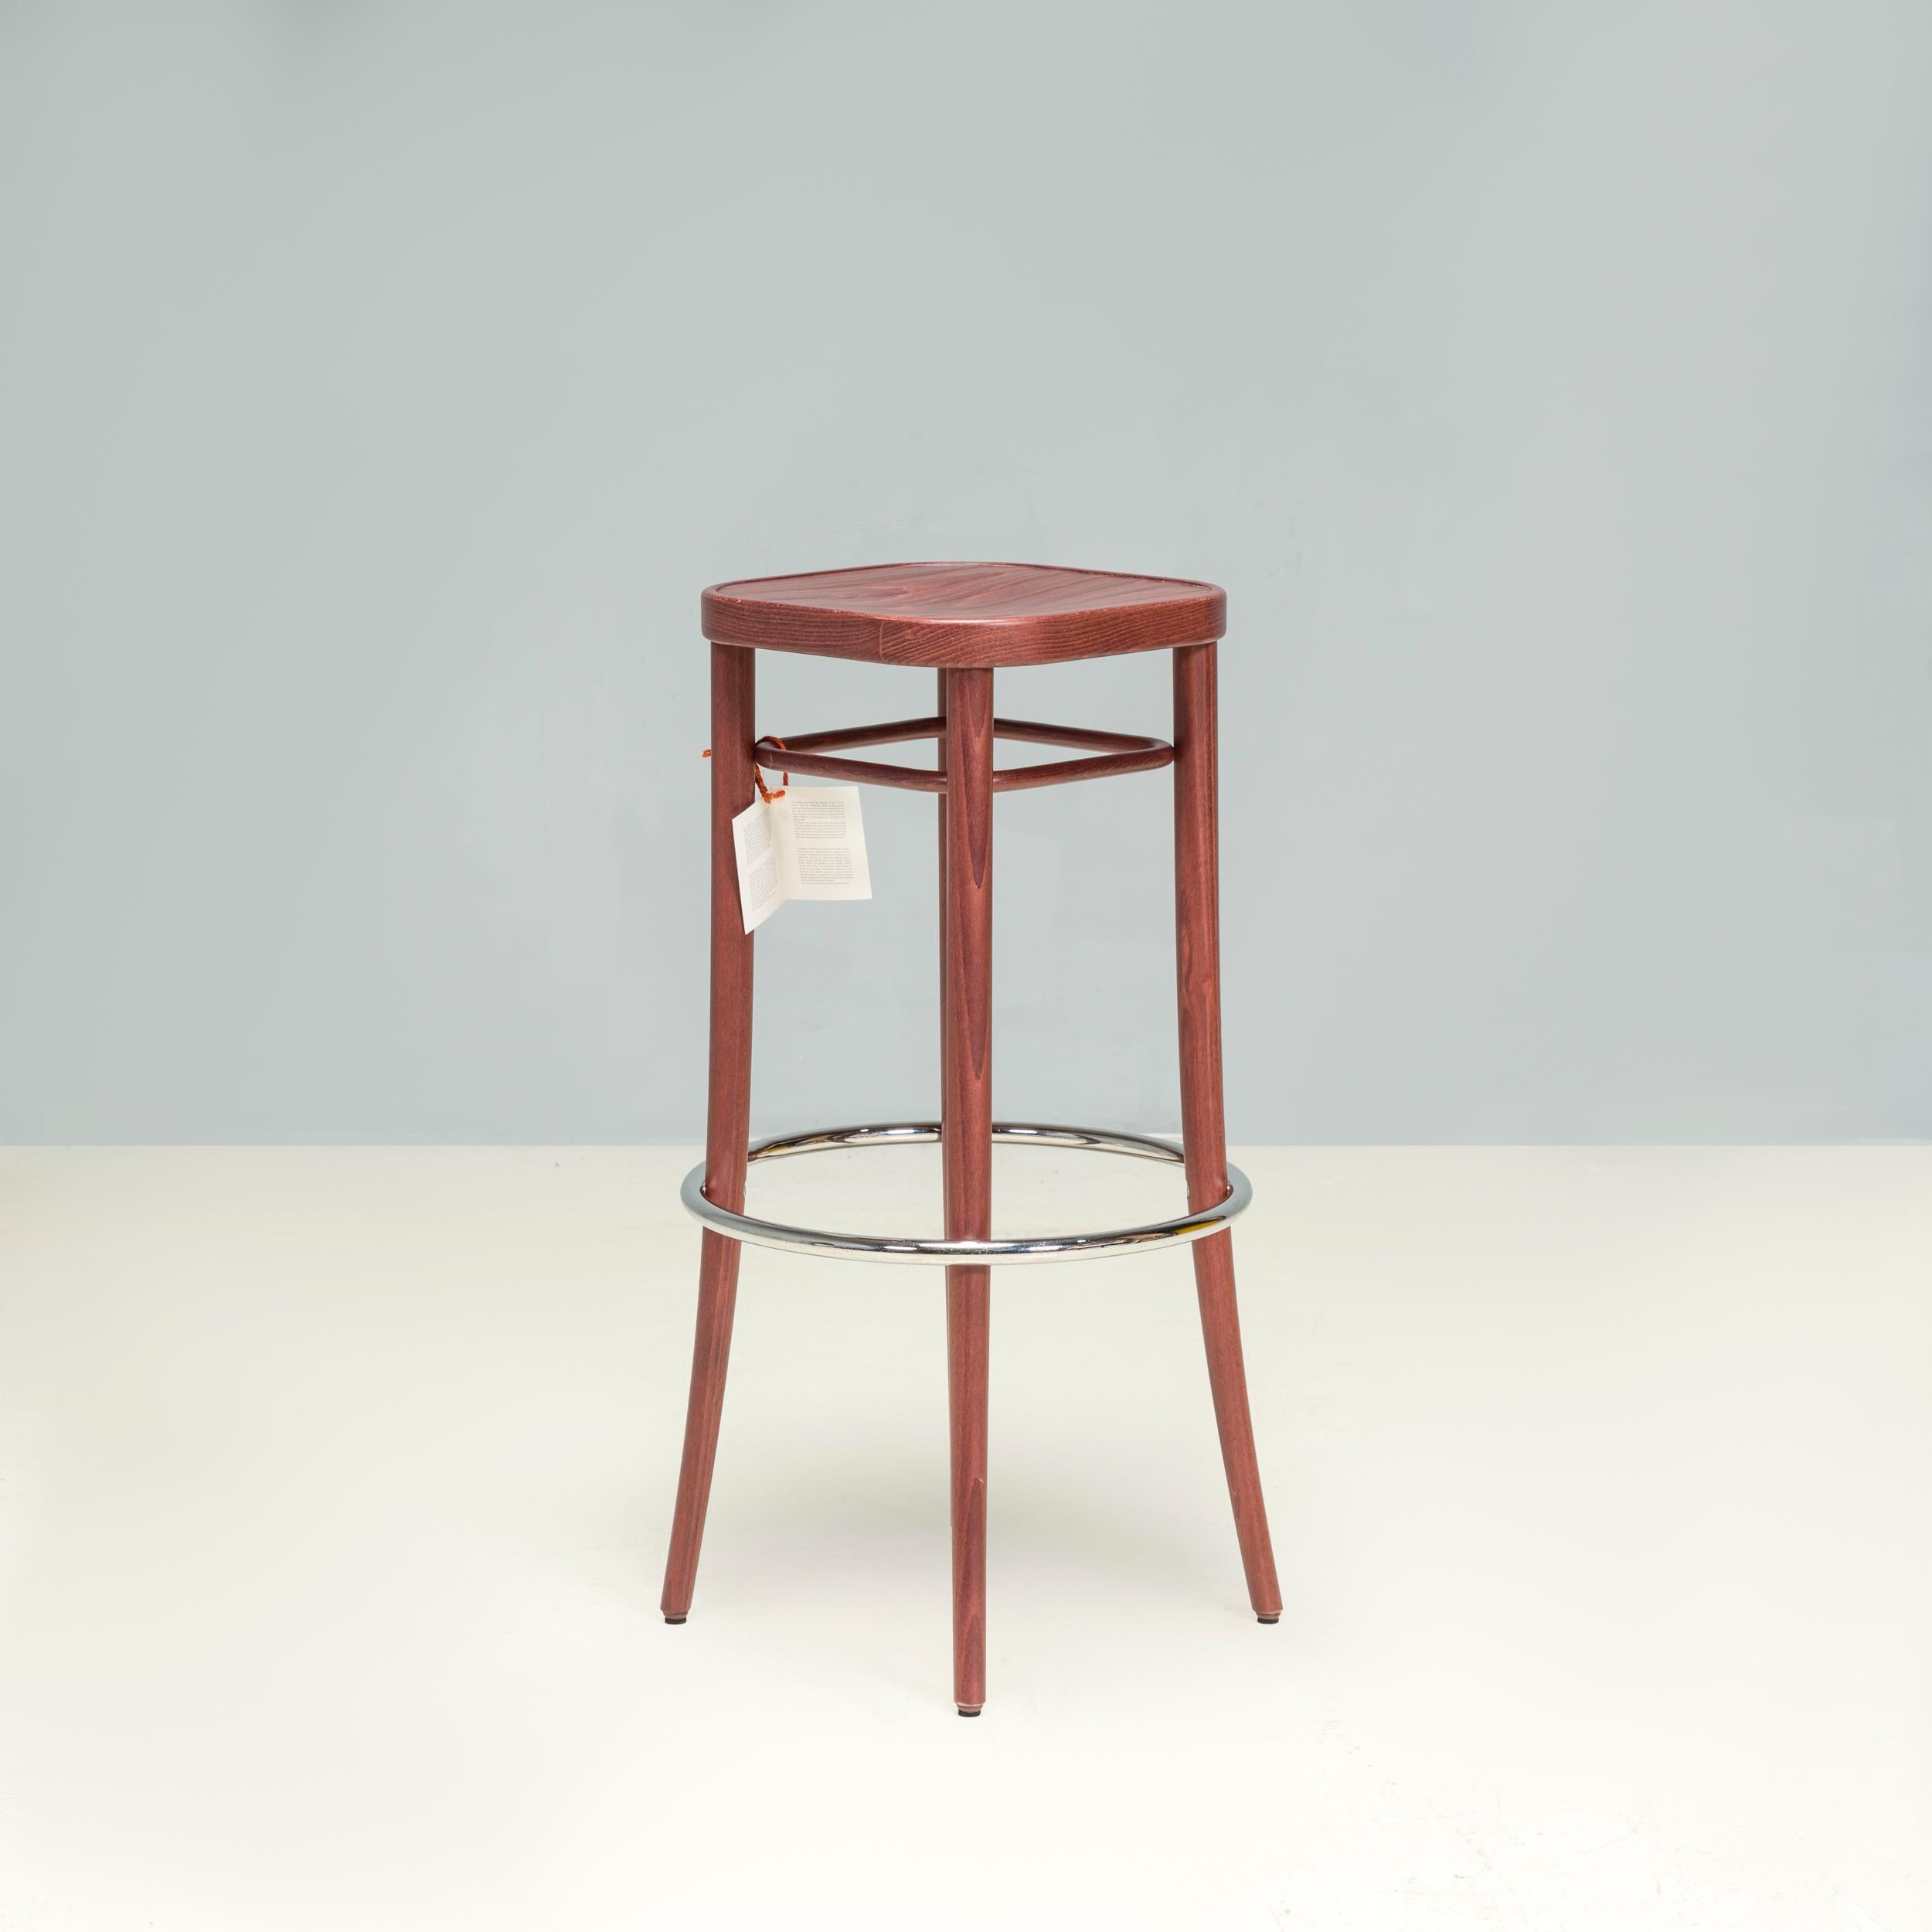 Thonet Vienna Walnut 144 Barhocker Stools, Set of 6 In Excellent Condition For Sale In London, GB